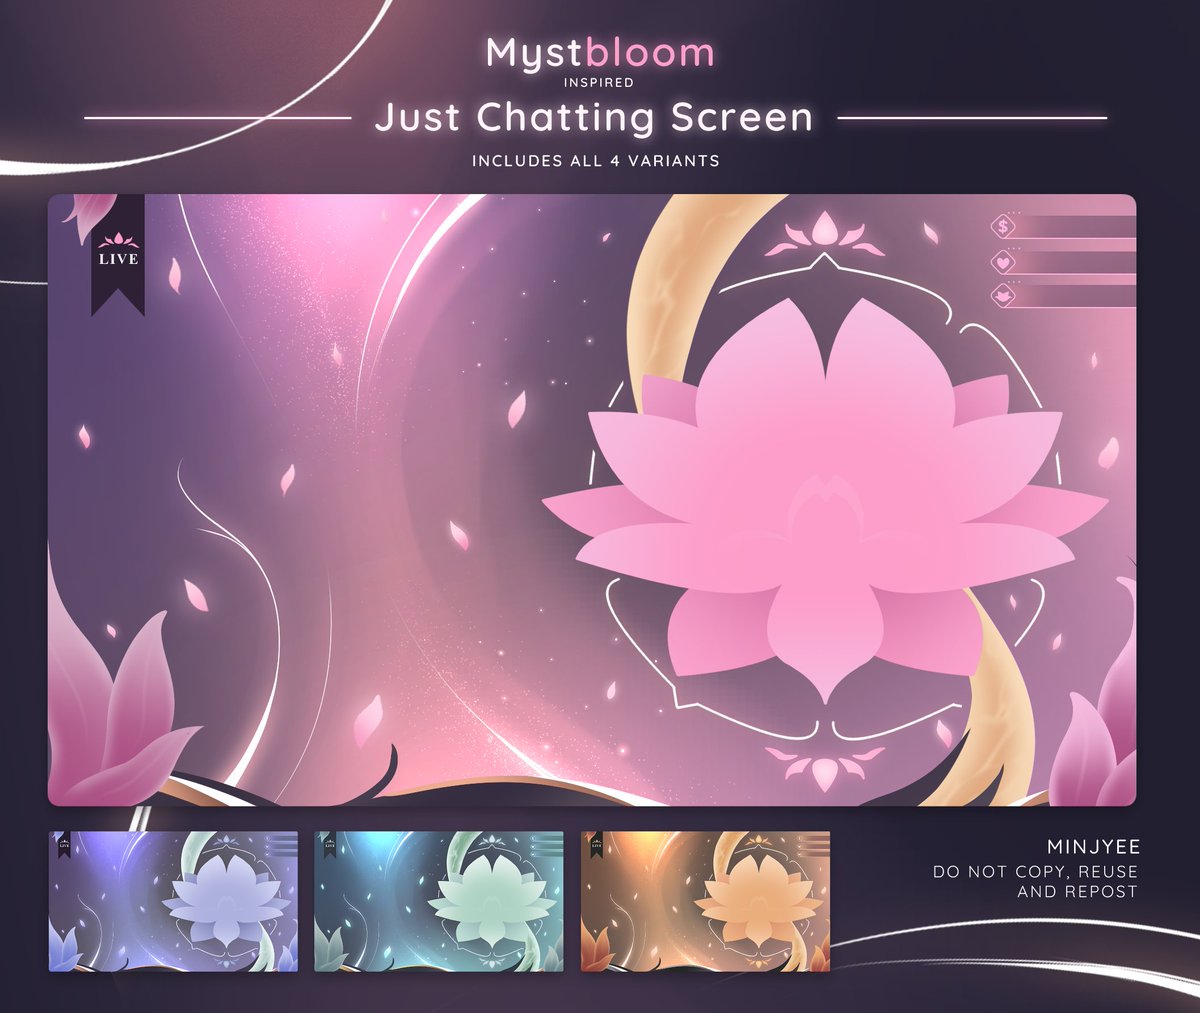 ⎯♡ FREE Mystbloom-inspired overlay ♡⎯  

- 4x Static Just Chatting Screen   

I fell in LOVE with the Valorant Mystbloom bundle and it inspired this just chatting overlay!!  

♡ + ↻ appreciated!
Available here: ko-fi.com/s/1079aebdd9 #vtuber #vtuberassets #valorant